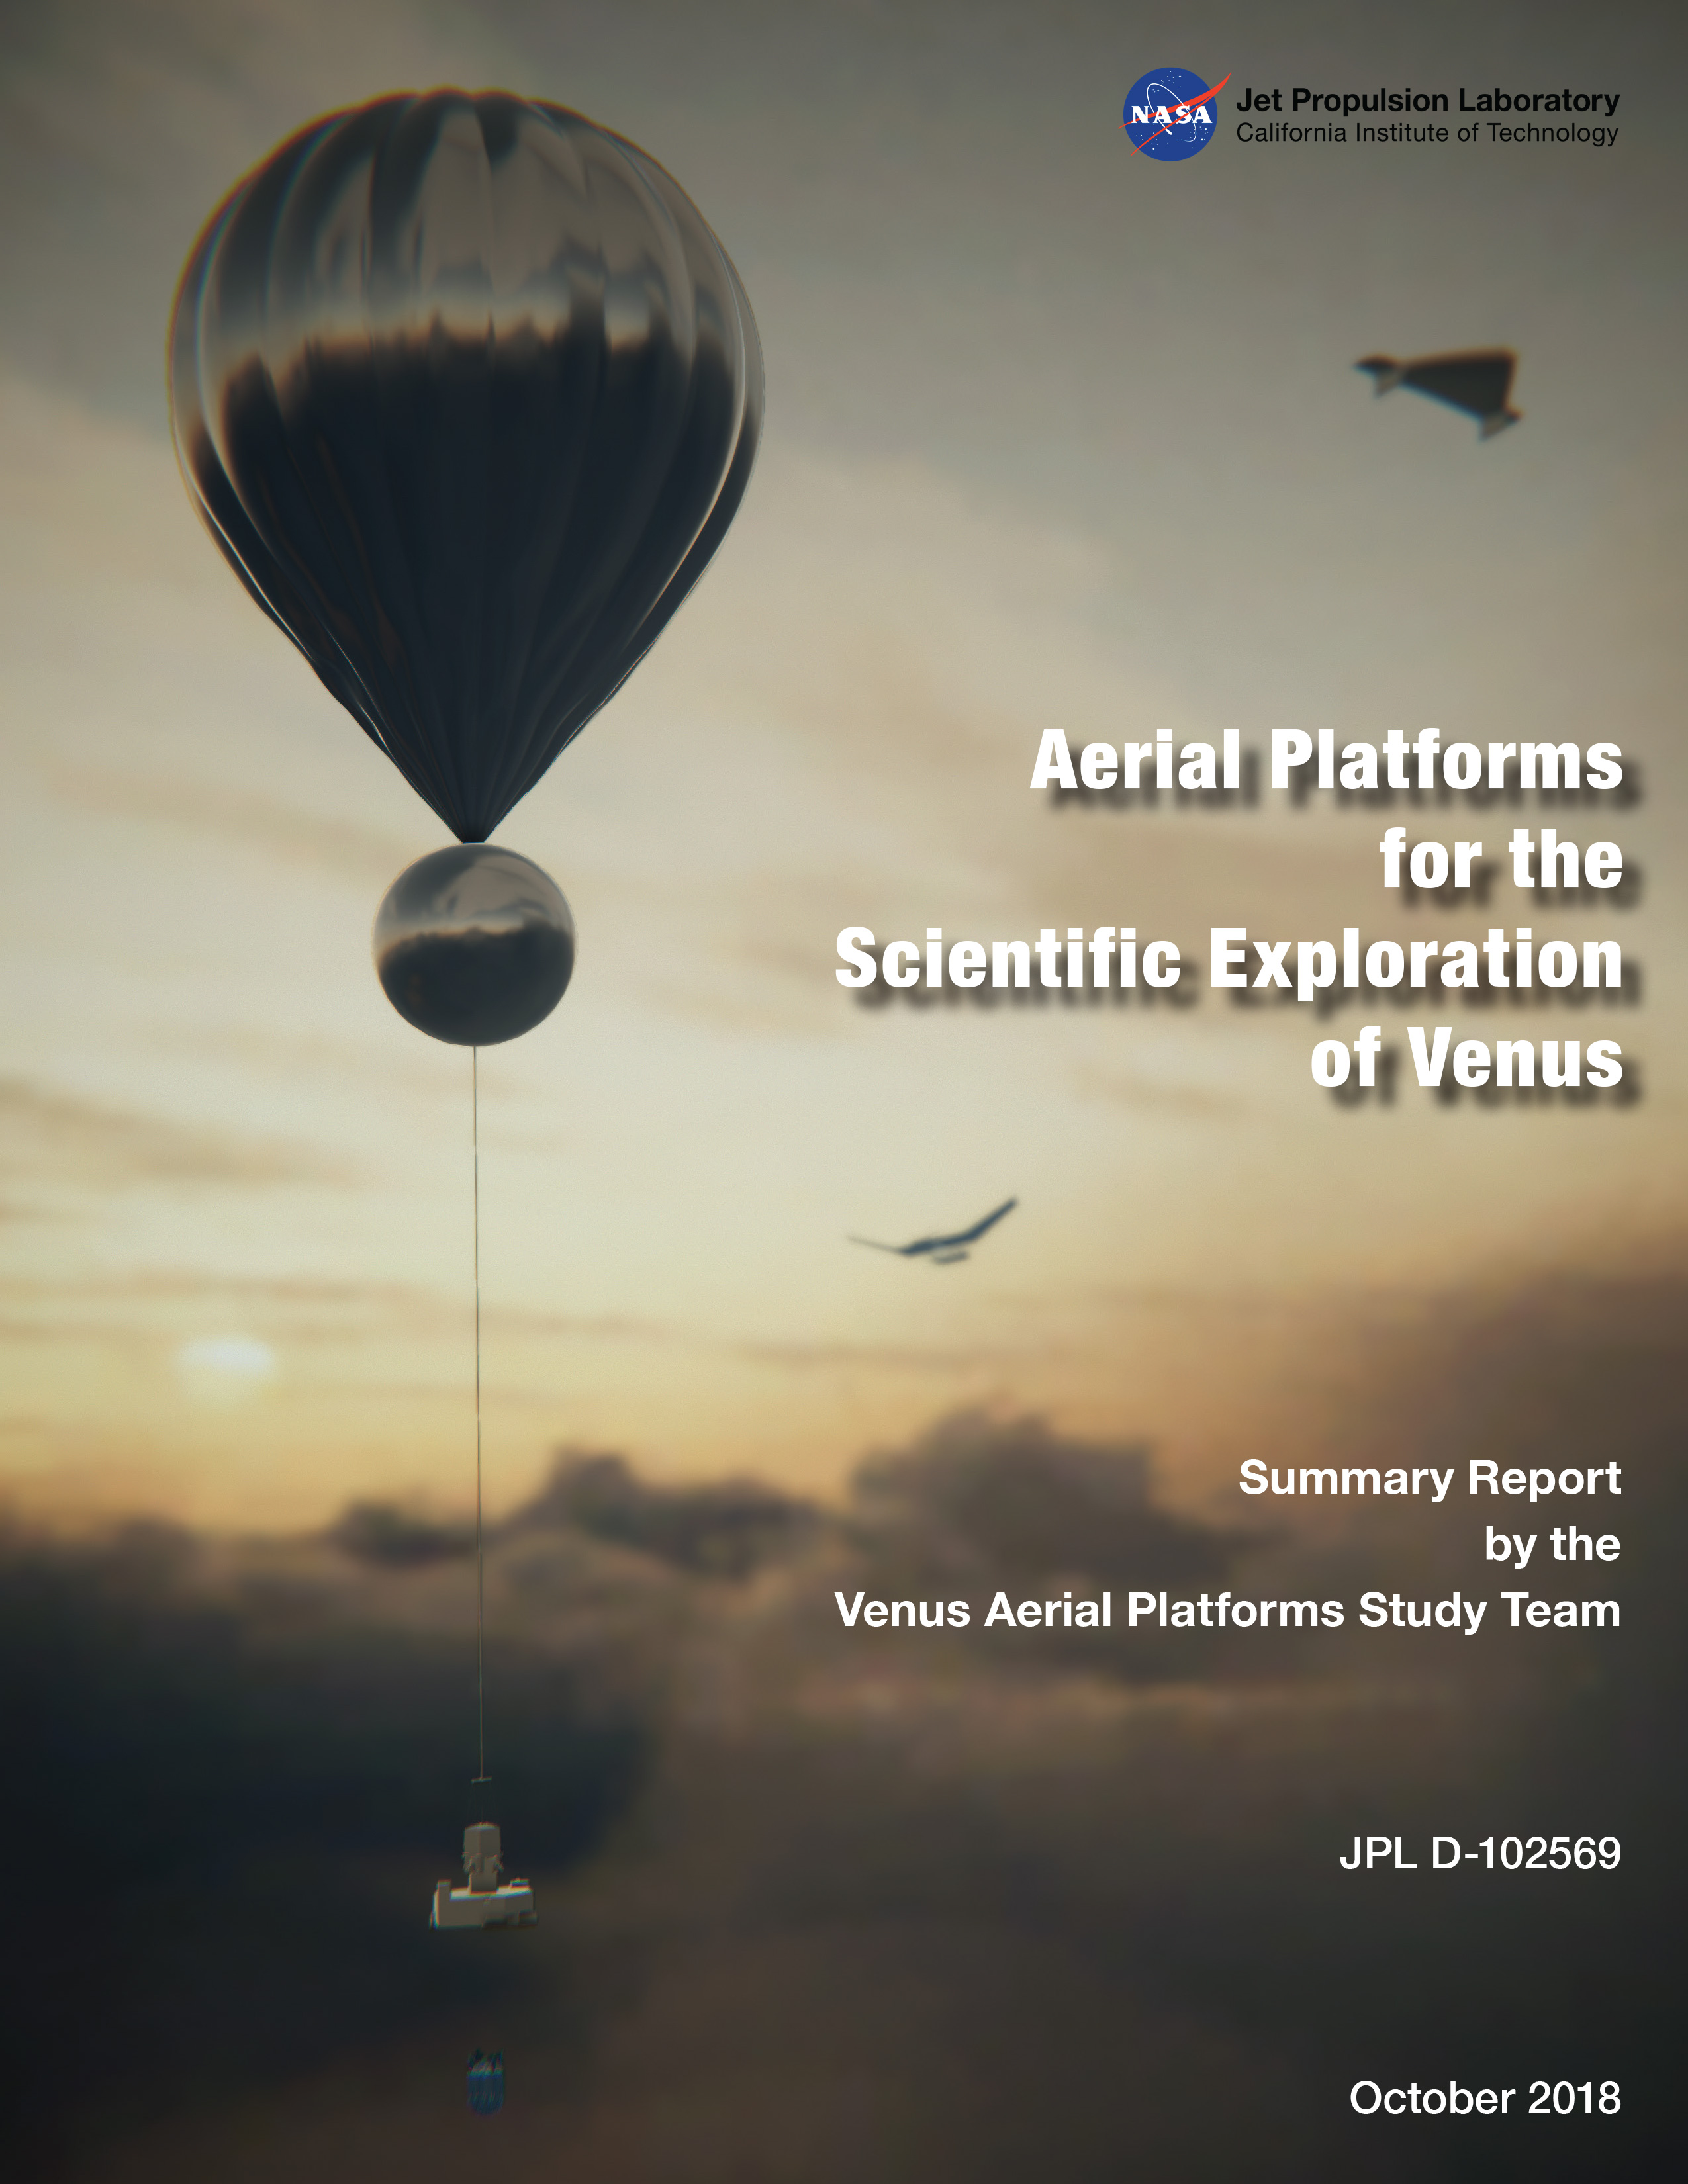 Detailed report on using aerial vehicles to explore Venus.